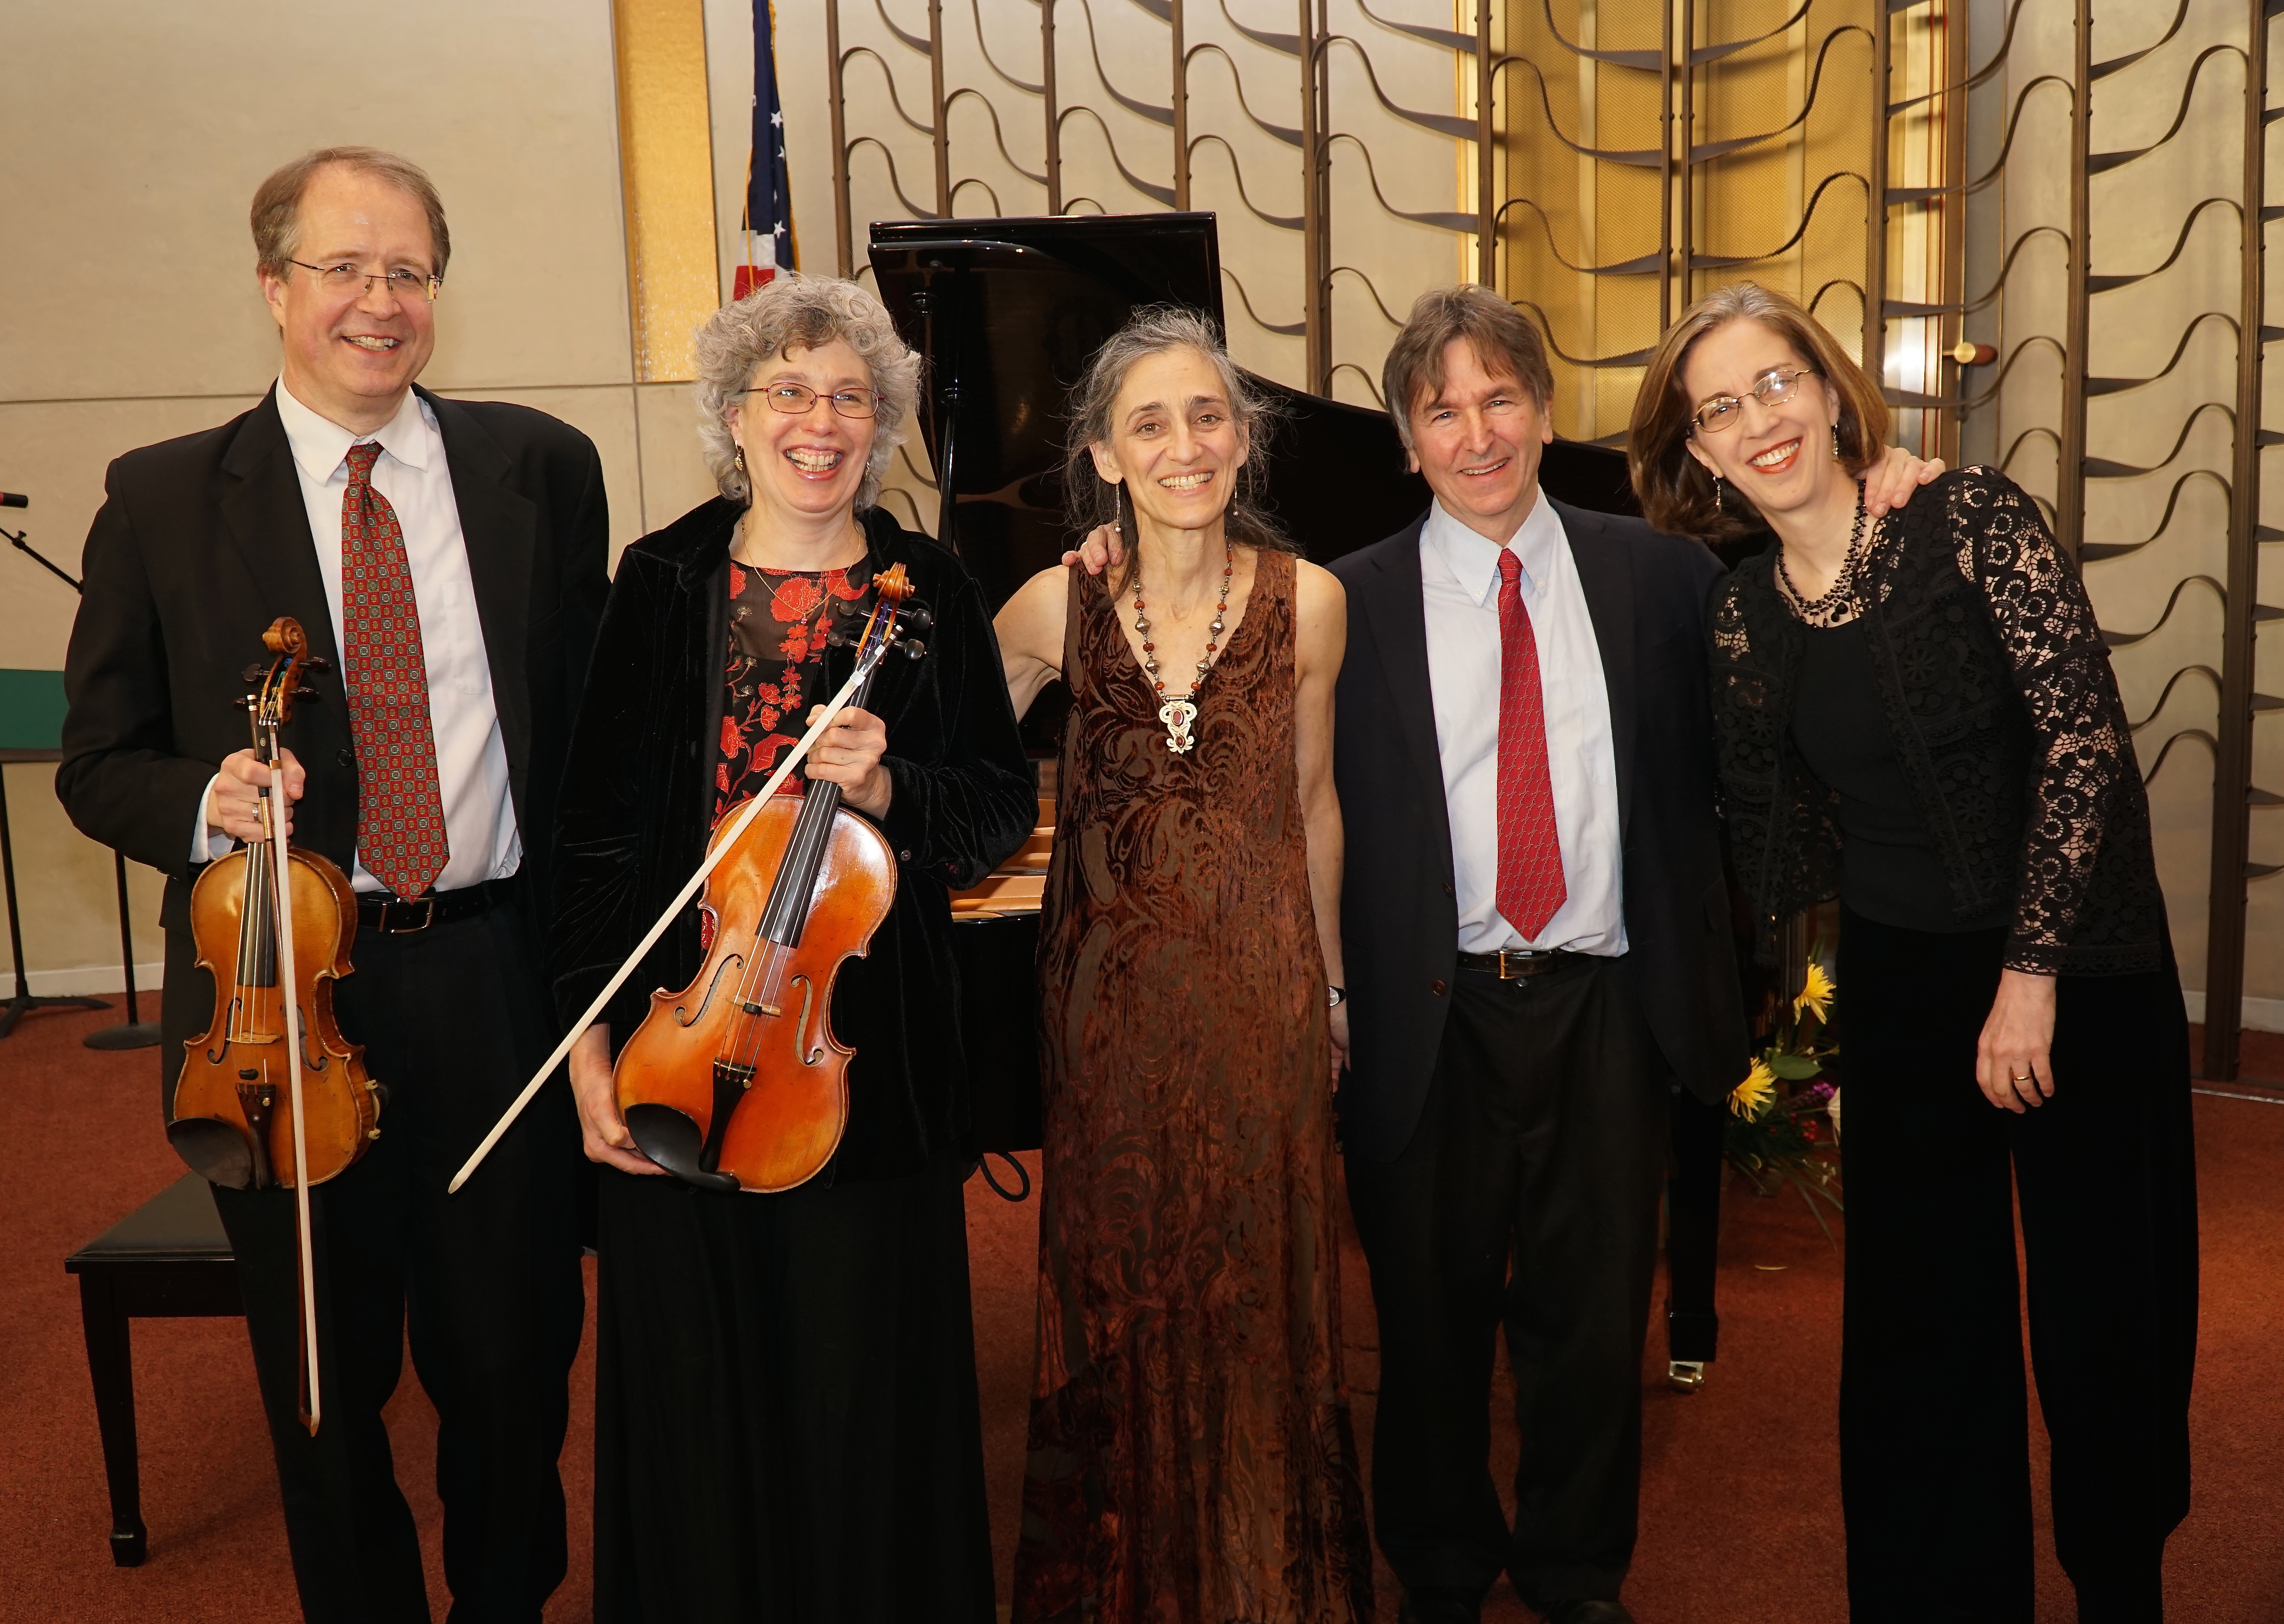 Chamber Music Celebrates Israel hq nude pic